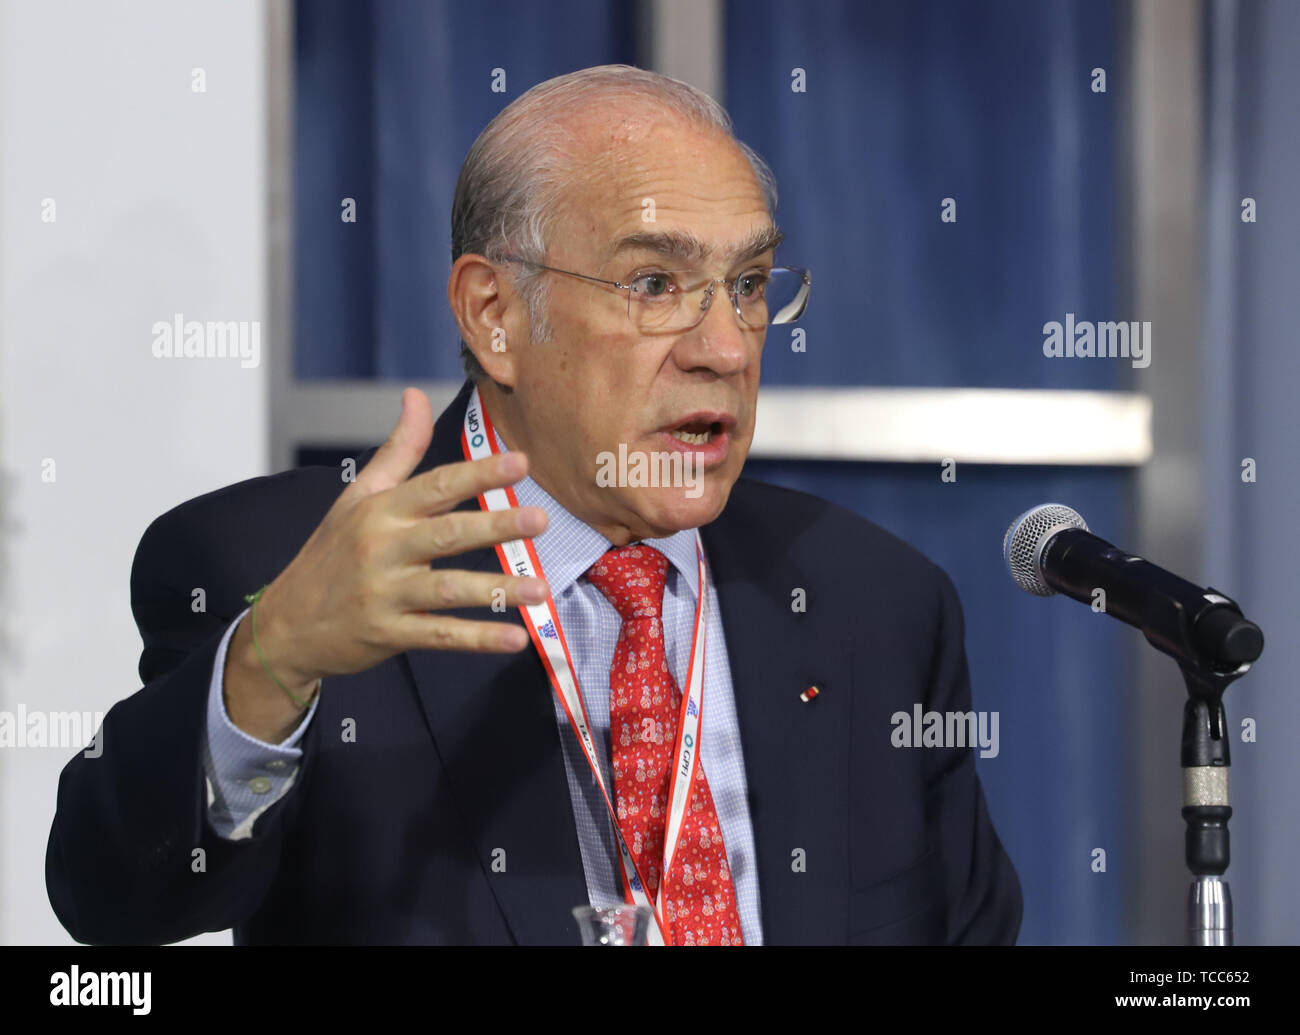 Tokyo, Japan. 7th June, 2019. The OECD Secretary General Angel Gurria delivers a keynote speech for the G20 High-level Symposium on Aging and Financial Inclusion in Tokyo on Friday, June 7, 2019. The symposium is a connected to the G20 Finance Ministers and Central Bank Governors meeting which will be held in Fukuoka on June 8 and 9. Credit: Yoshio Tsunoda/AFLO/Alamy Live News Stock Photo